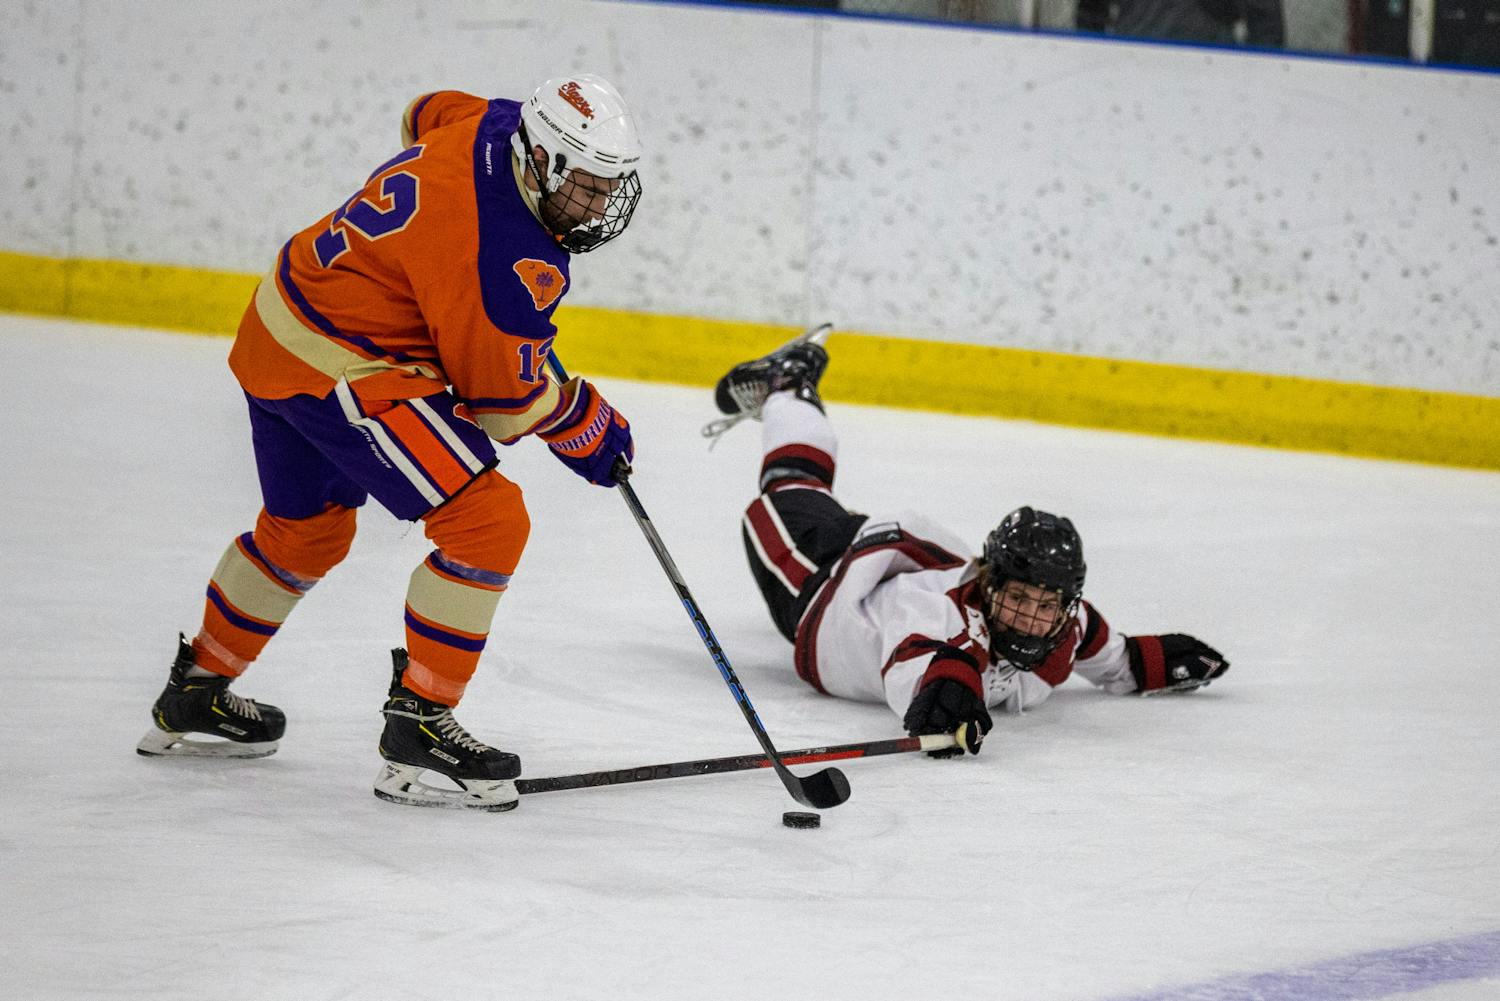 Sophomore winger Tommy Lokken slides across the ground in an attempt to recover the puck following a Clemson breakaway during a match on Nov. 11, 2022. The game's first period kicked off with a series of aggressive advances as players from both teams slammed each other against boards and across the ice to capture early momentum.